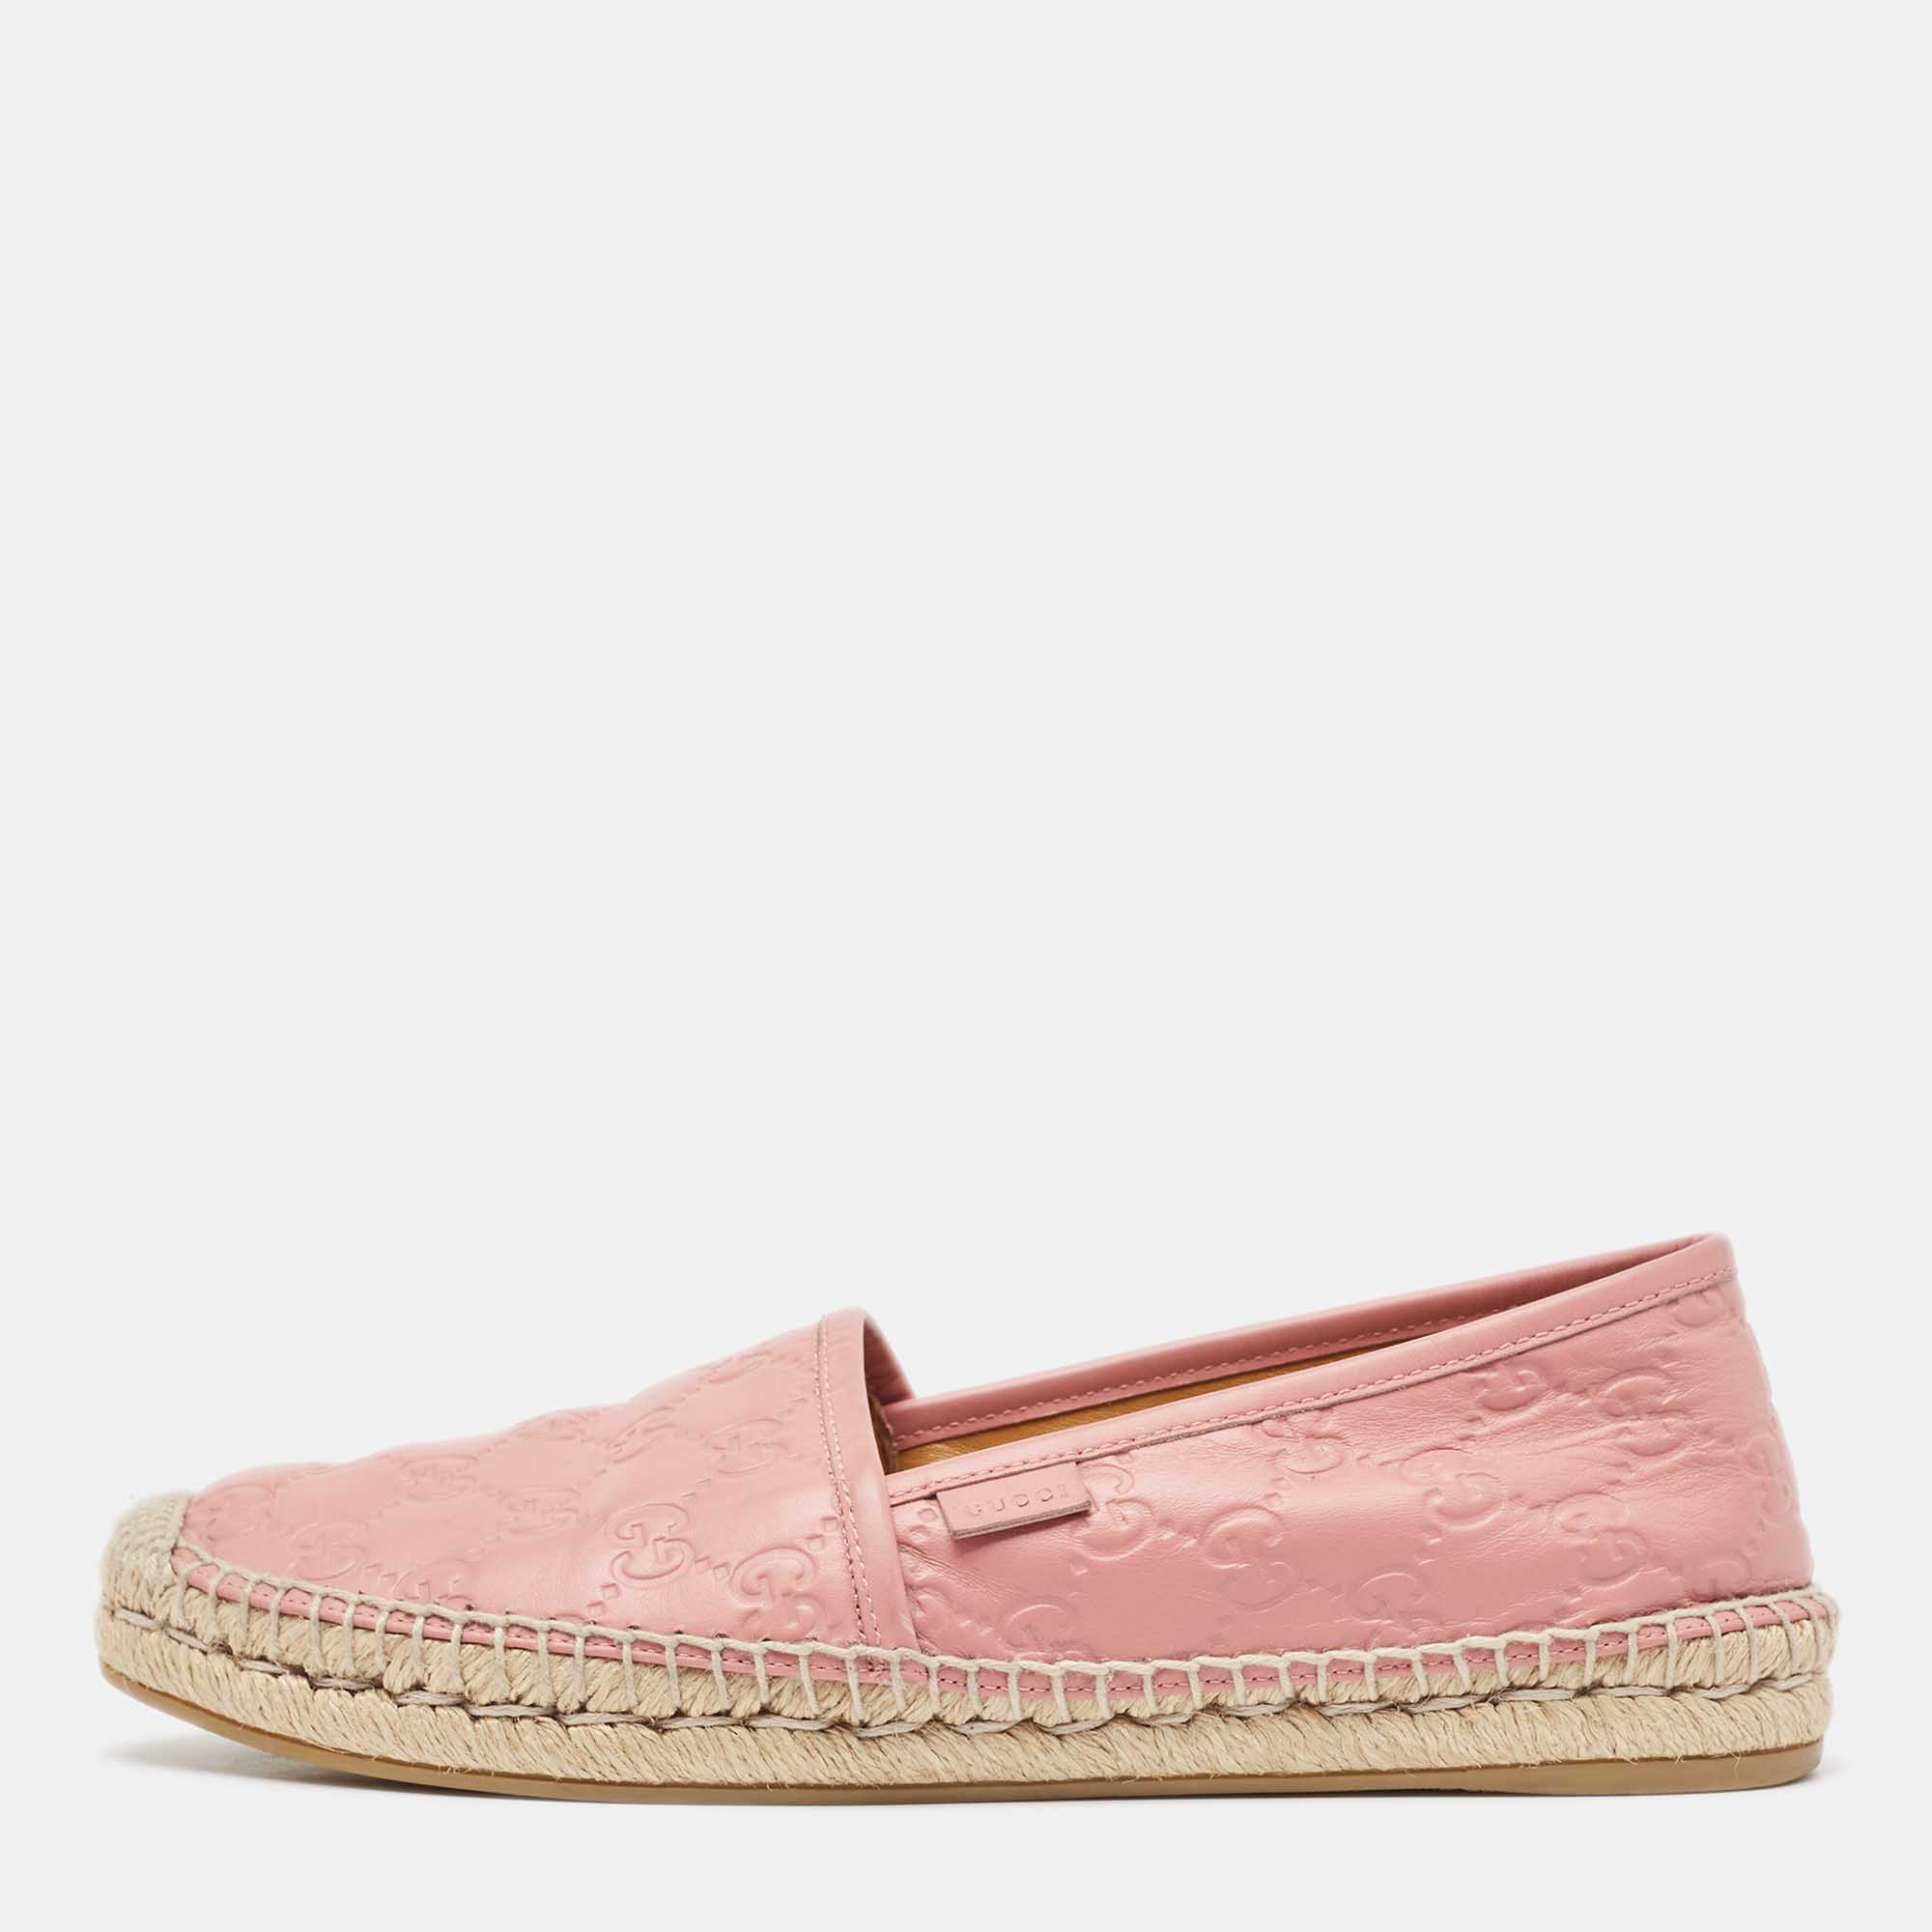 Gucci pink gg leather slip on espadrilles flats size 39.5